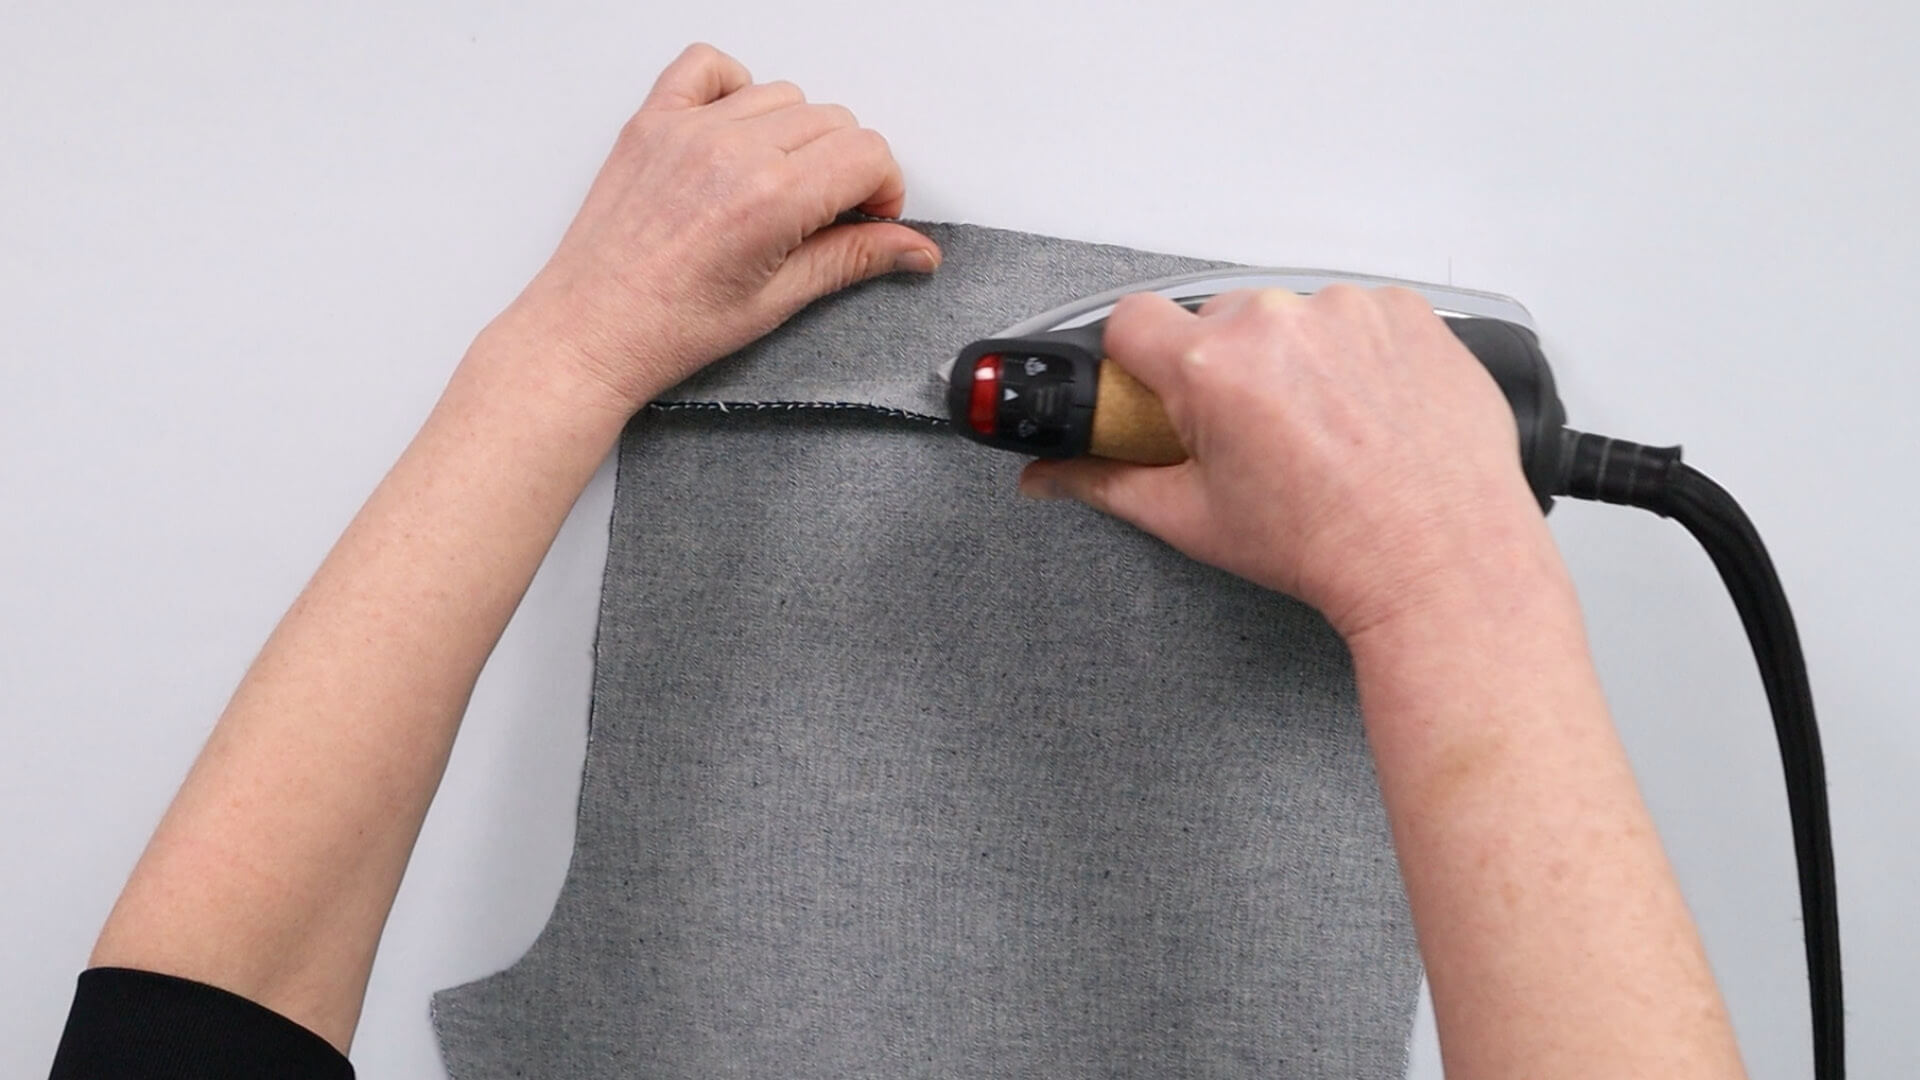 The picture shows how the saddle seam of the jeans is ironed over.